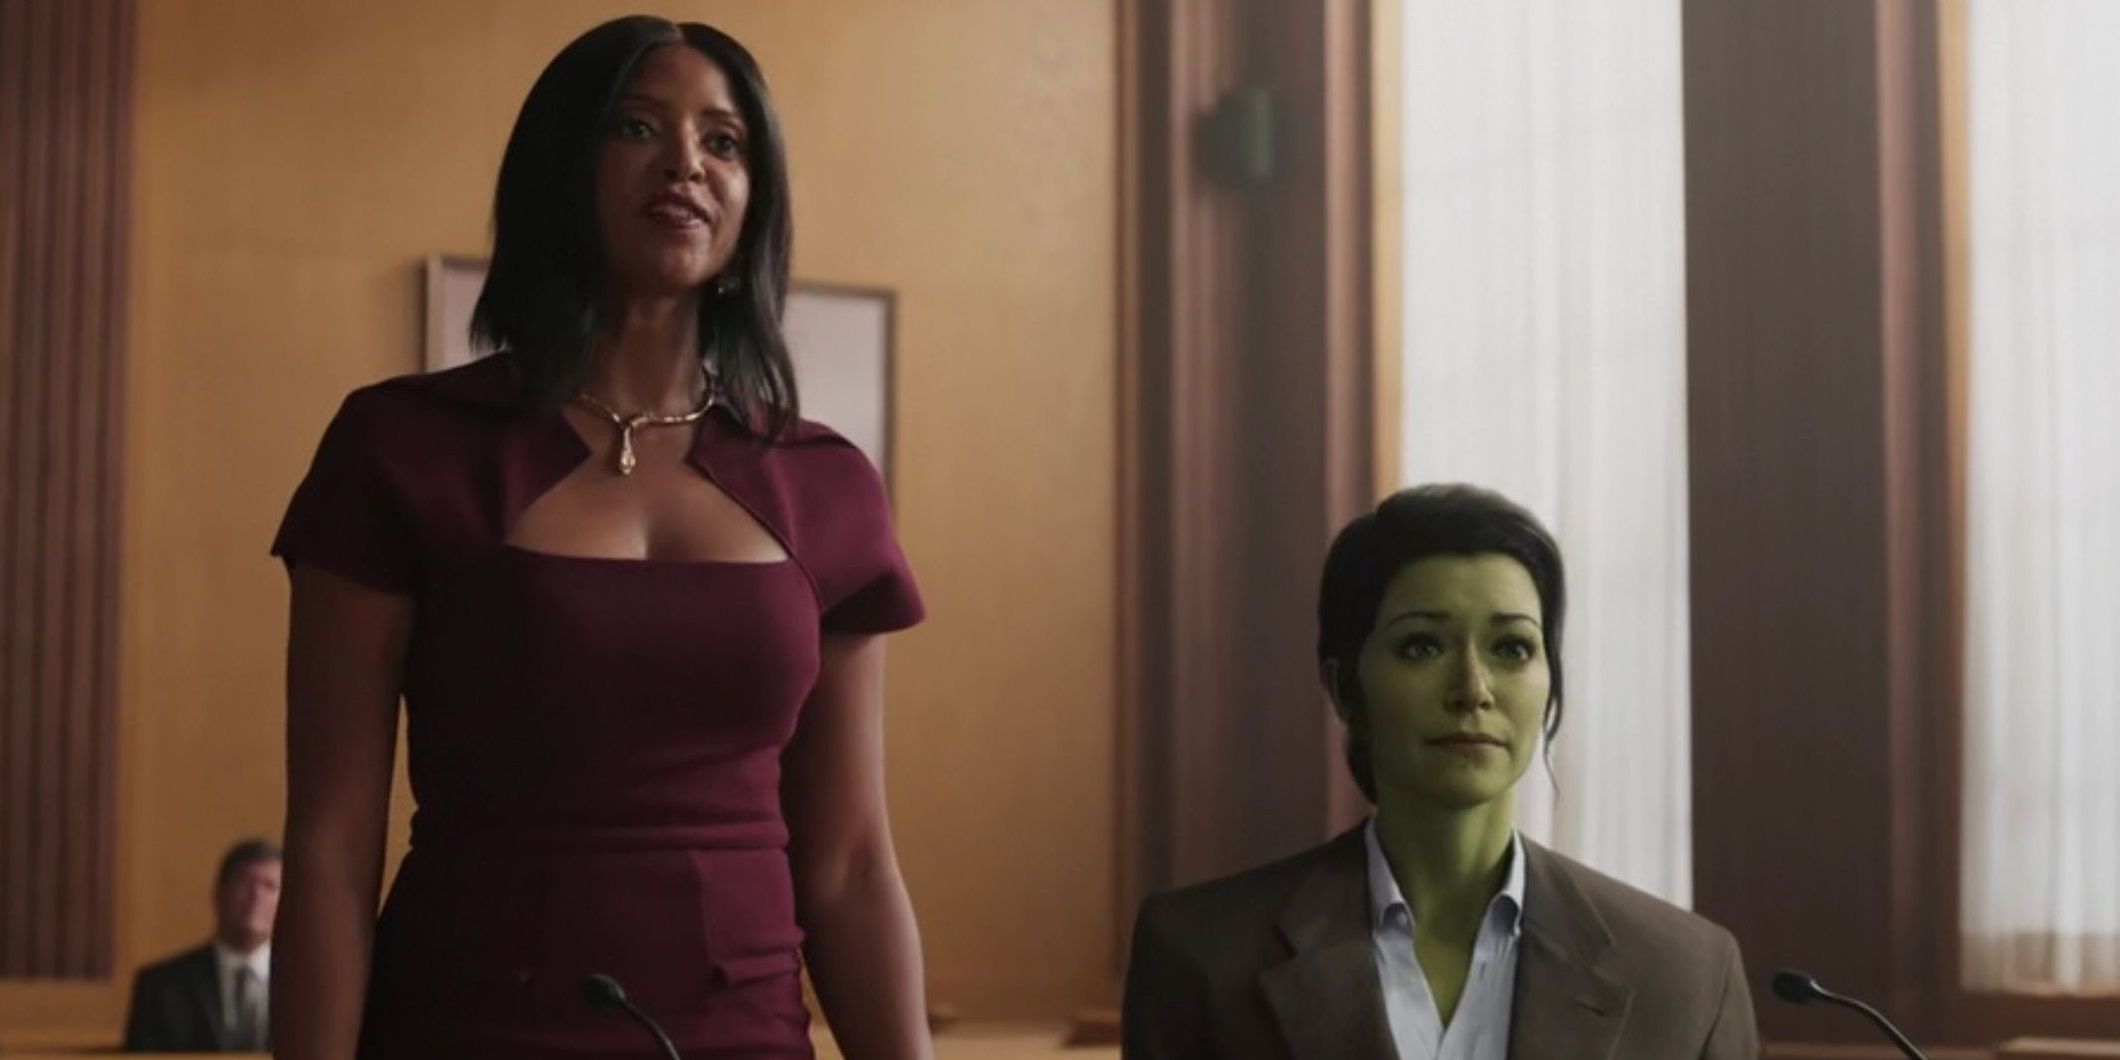 Mallory Book and Jen Walters in court in She-Hulk episode 5